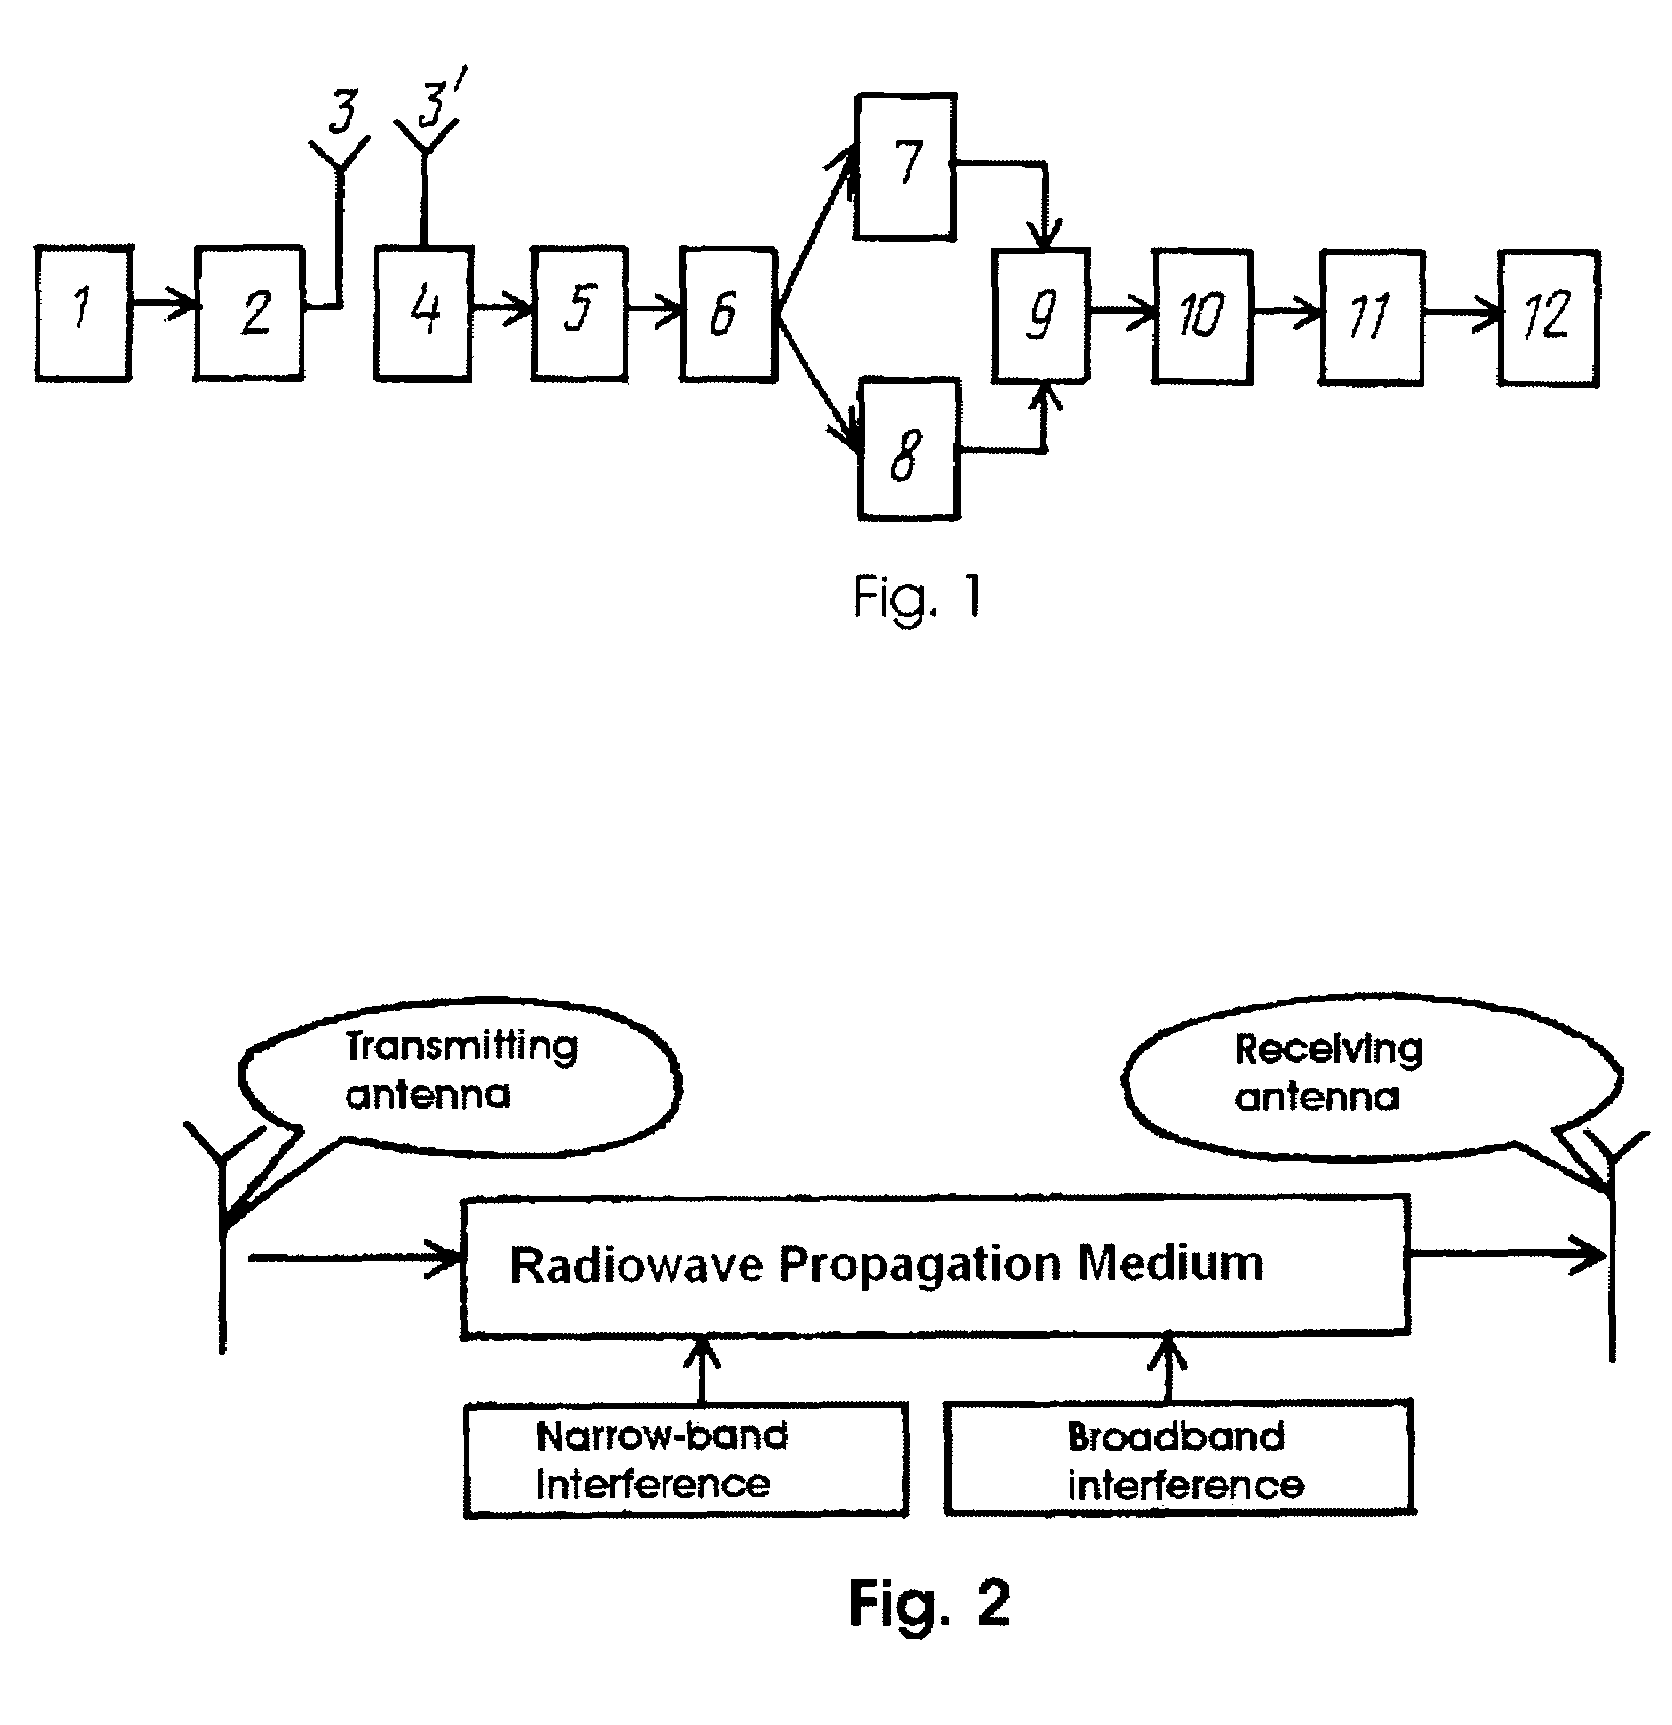 Method for suppressing narrowband noise in a wideband communication system